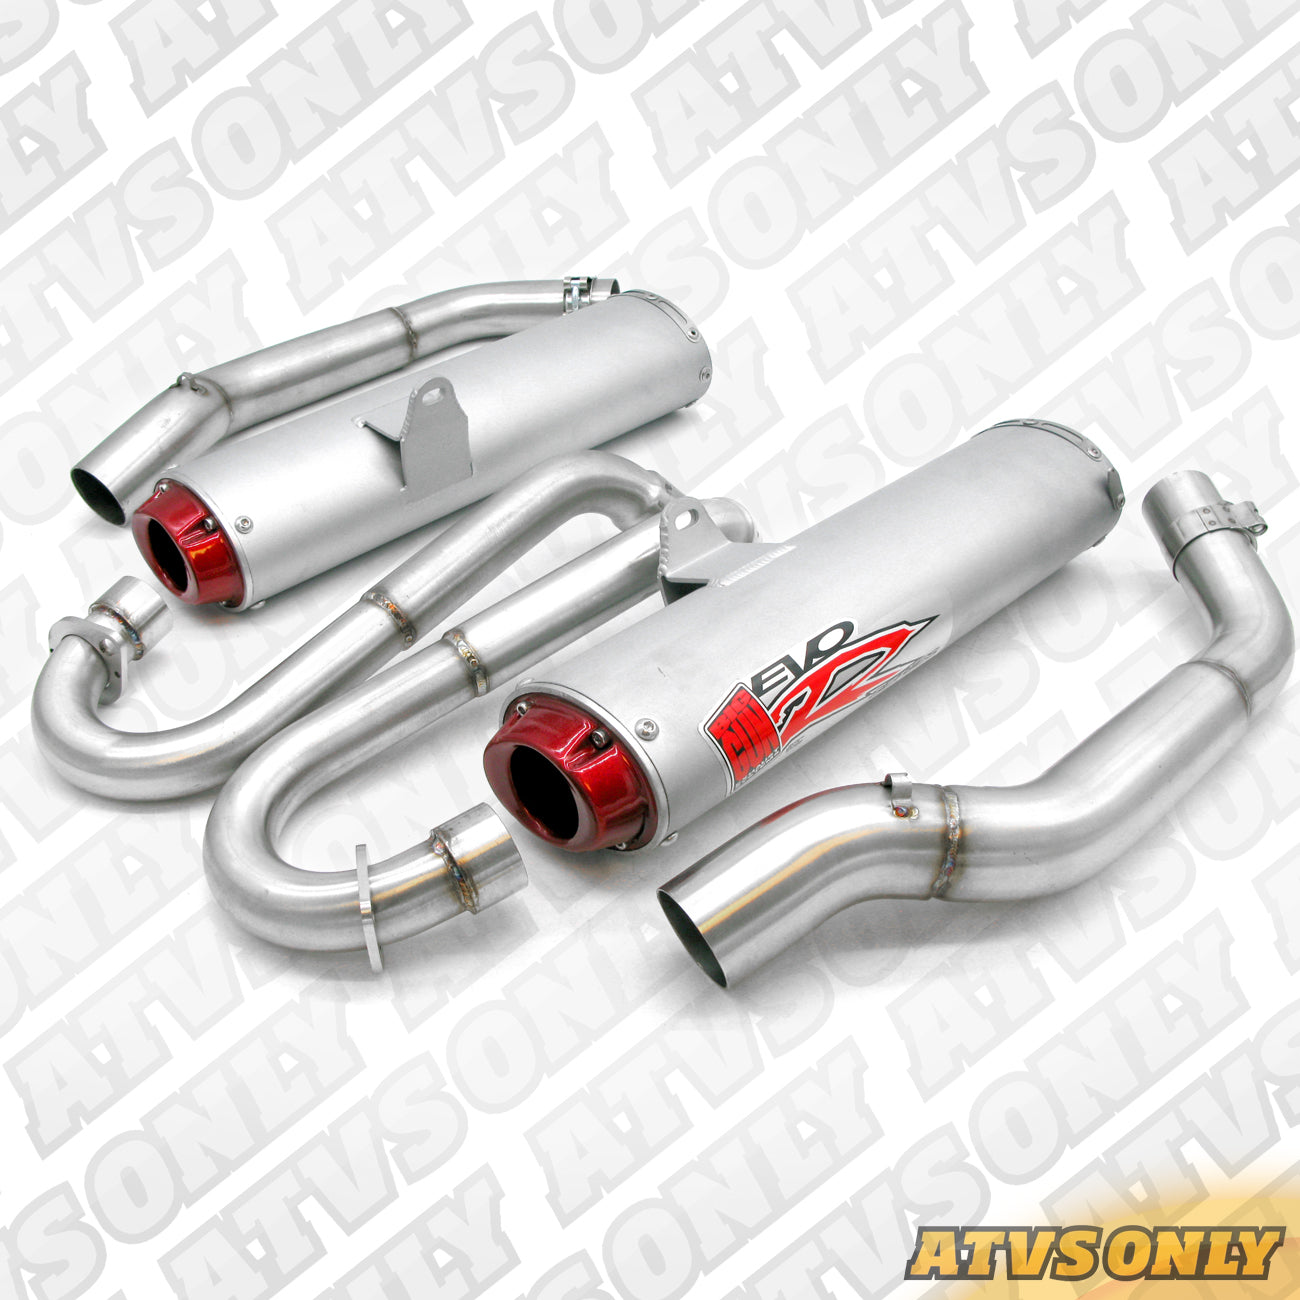 Exhaust – EVO R Full Exhaust Twin System for Yamaha Raptor 700